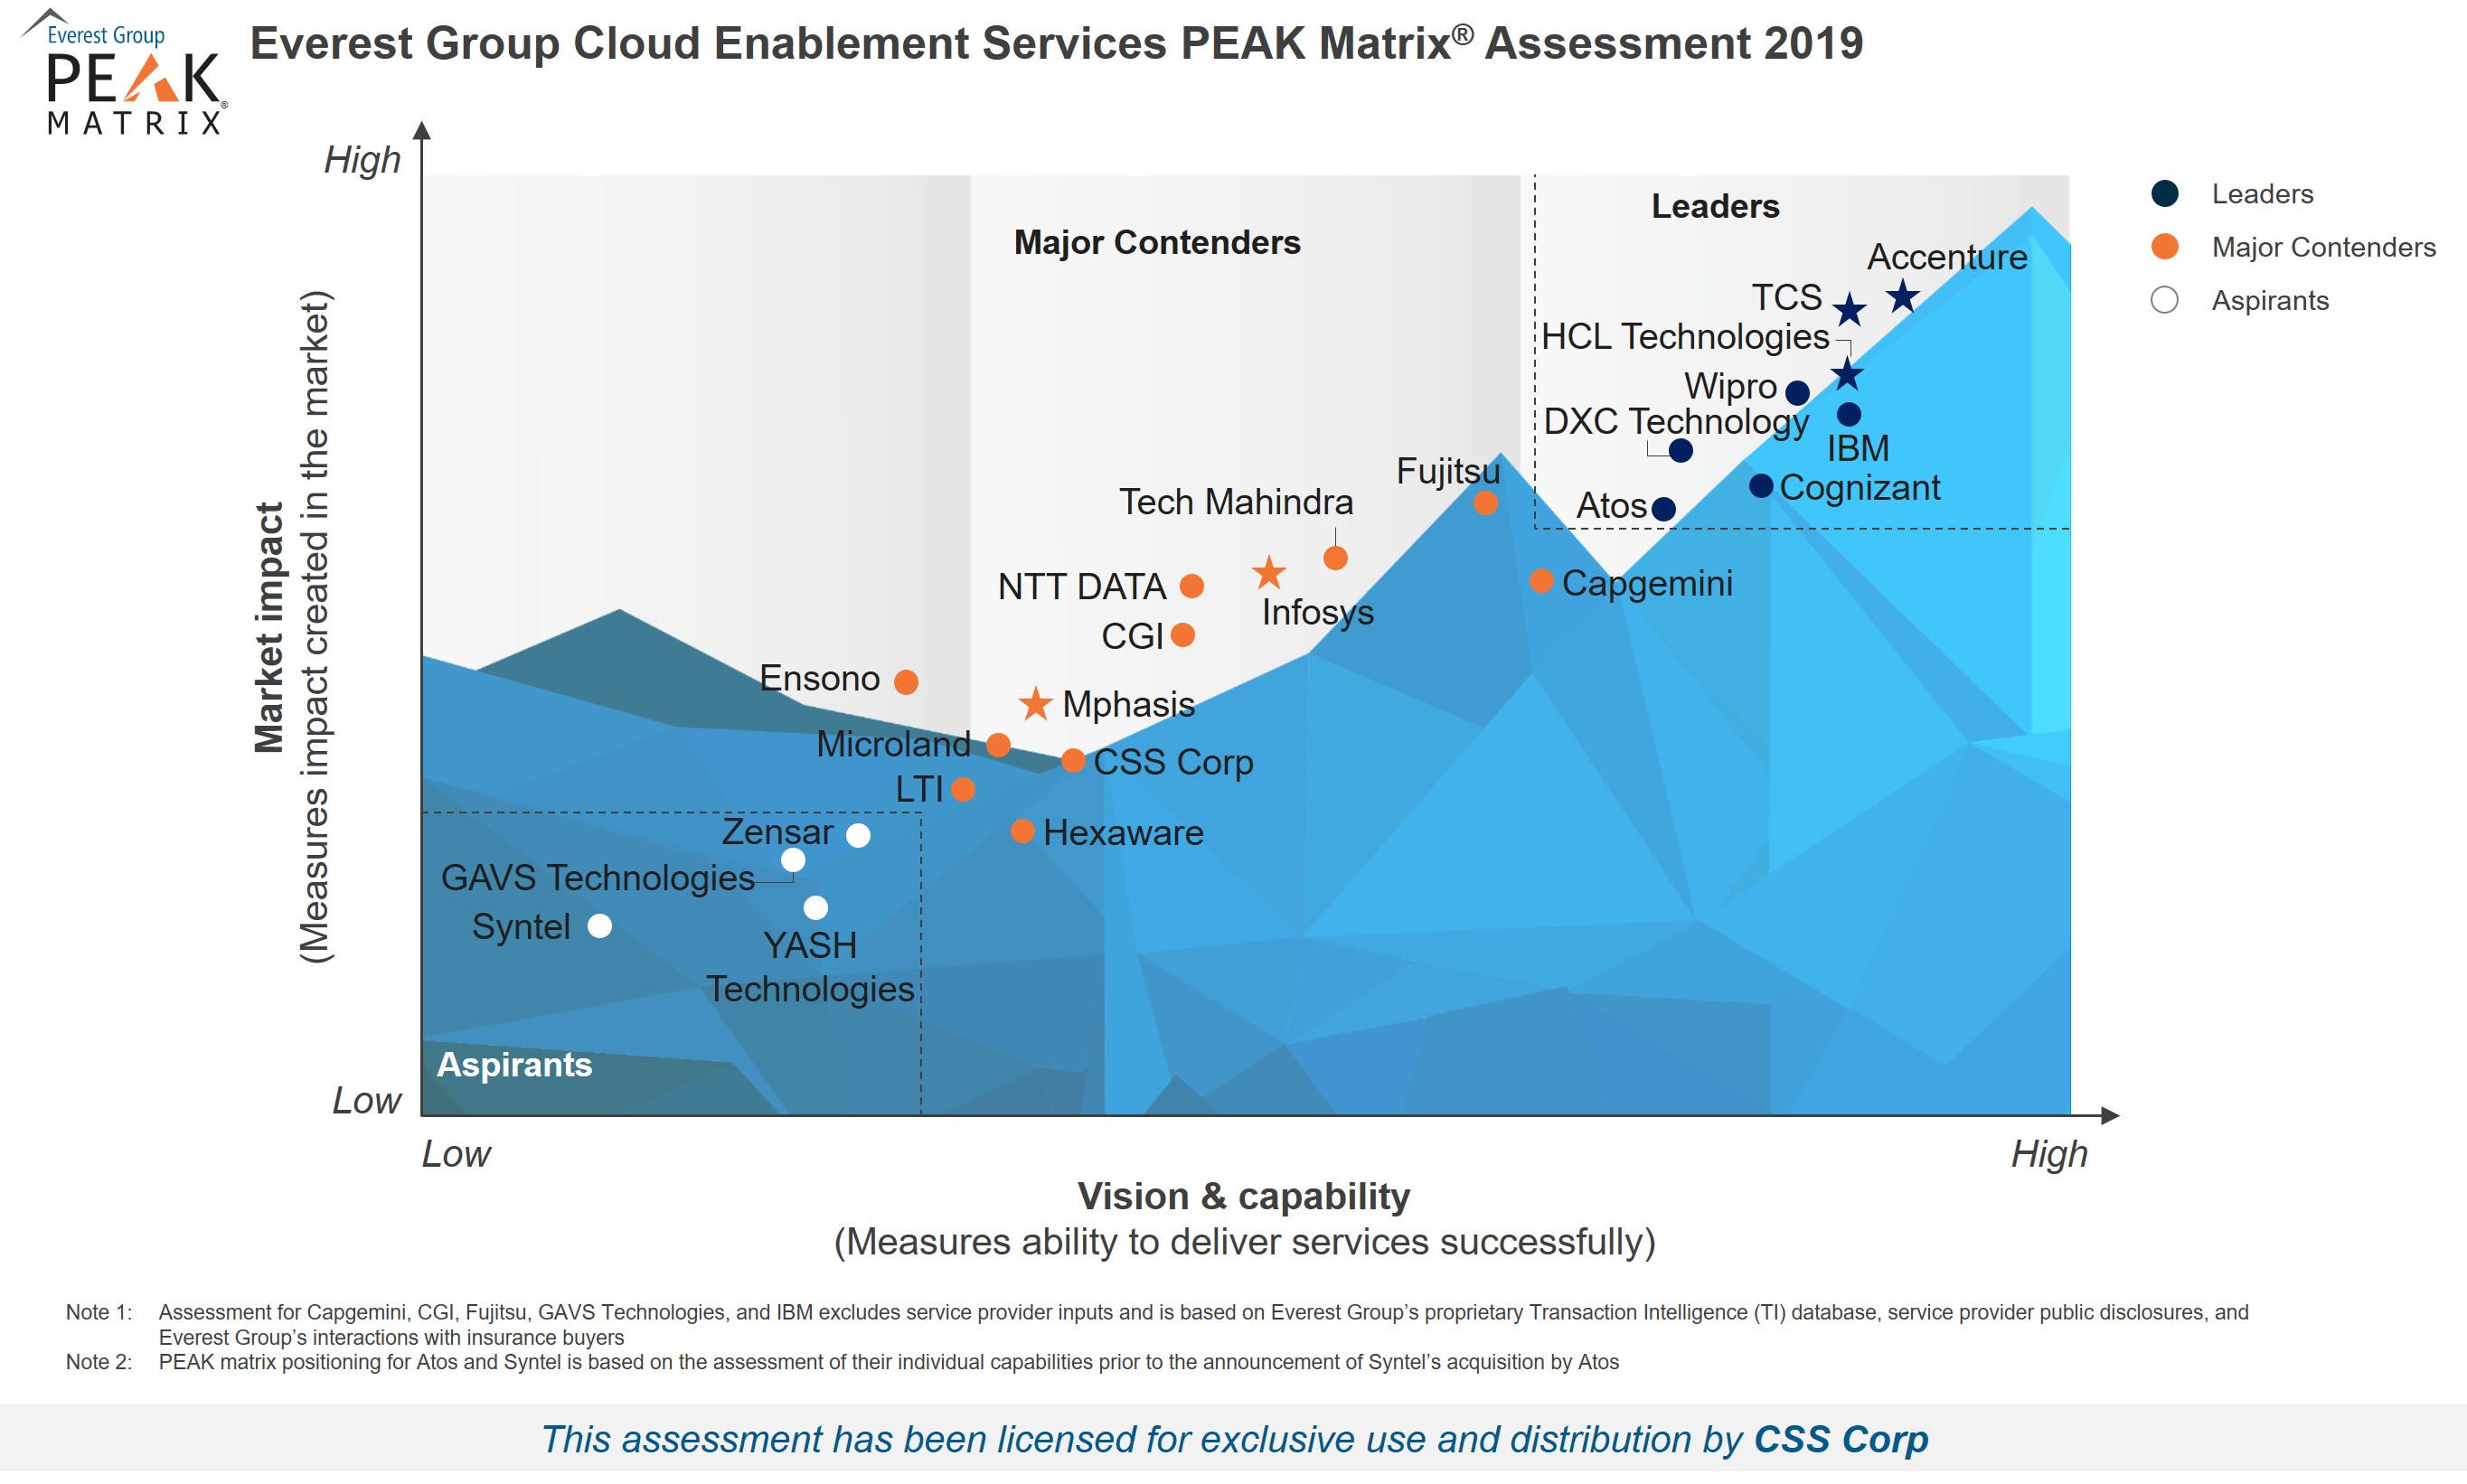 High-Res PEAK 2019 - Cloud Enablement Services - For CSS Corp